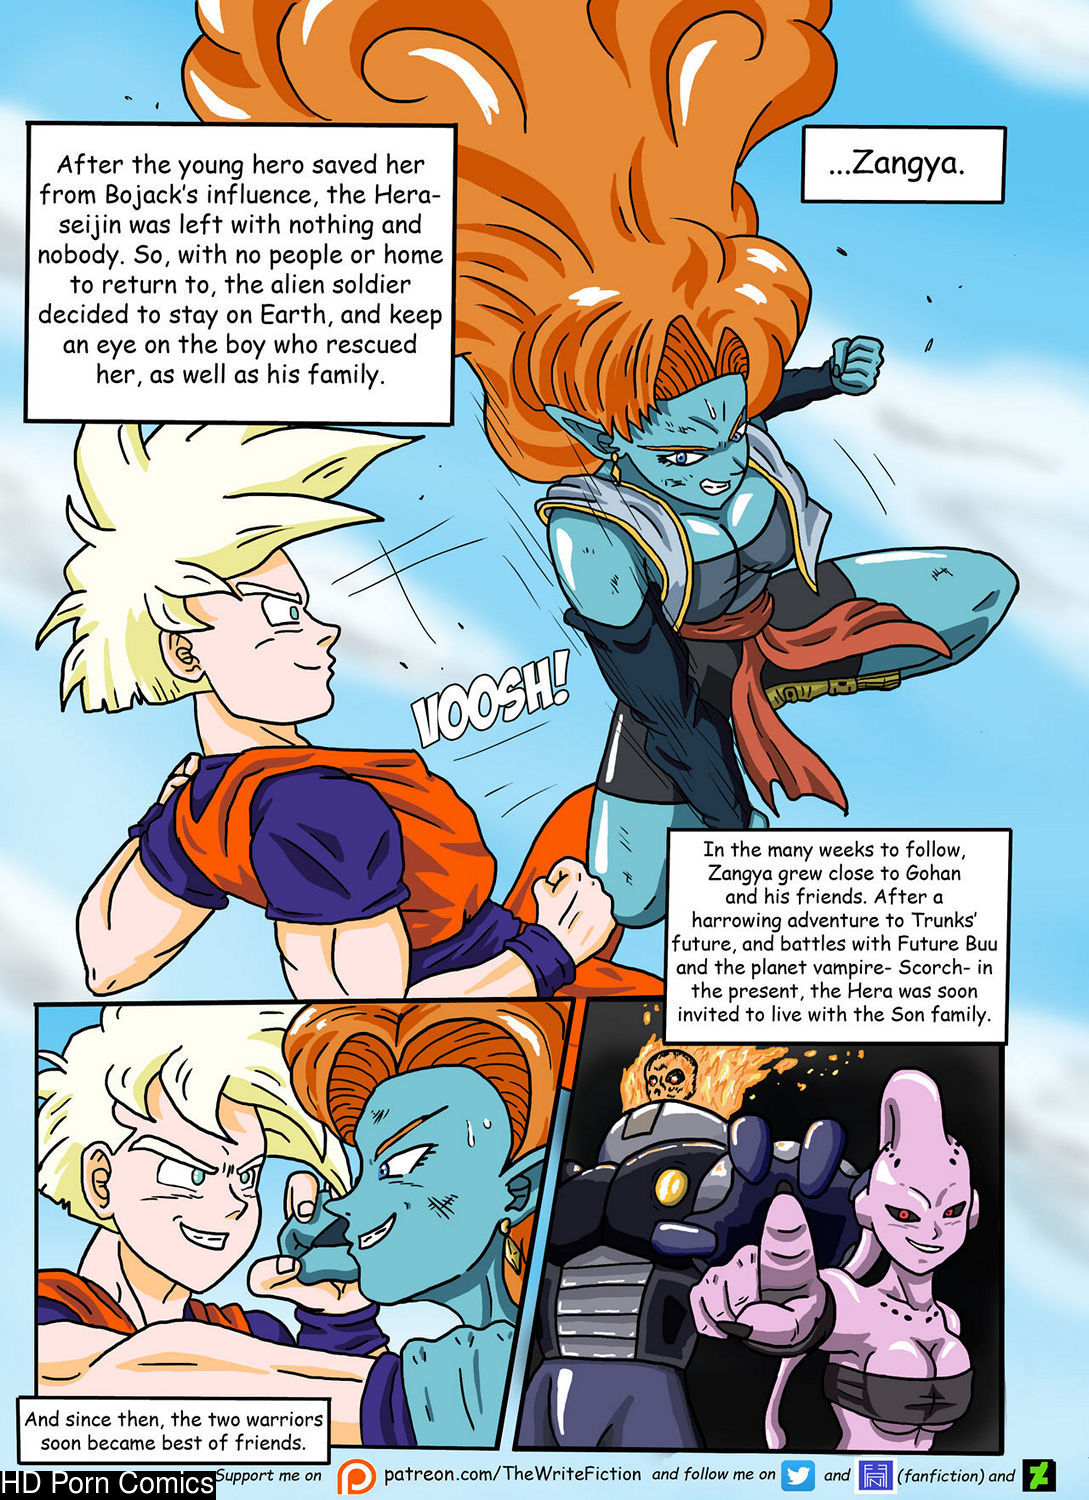 Young dragonballz porn free online - Adult gallery